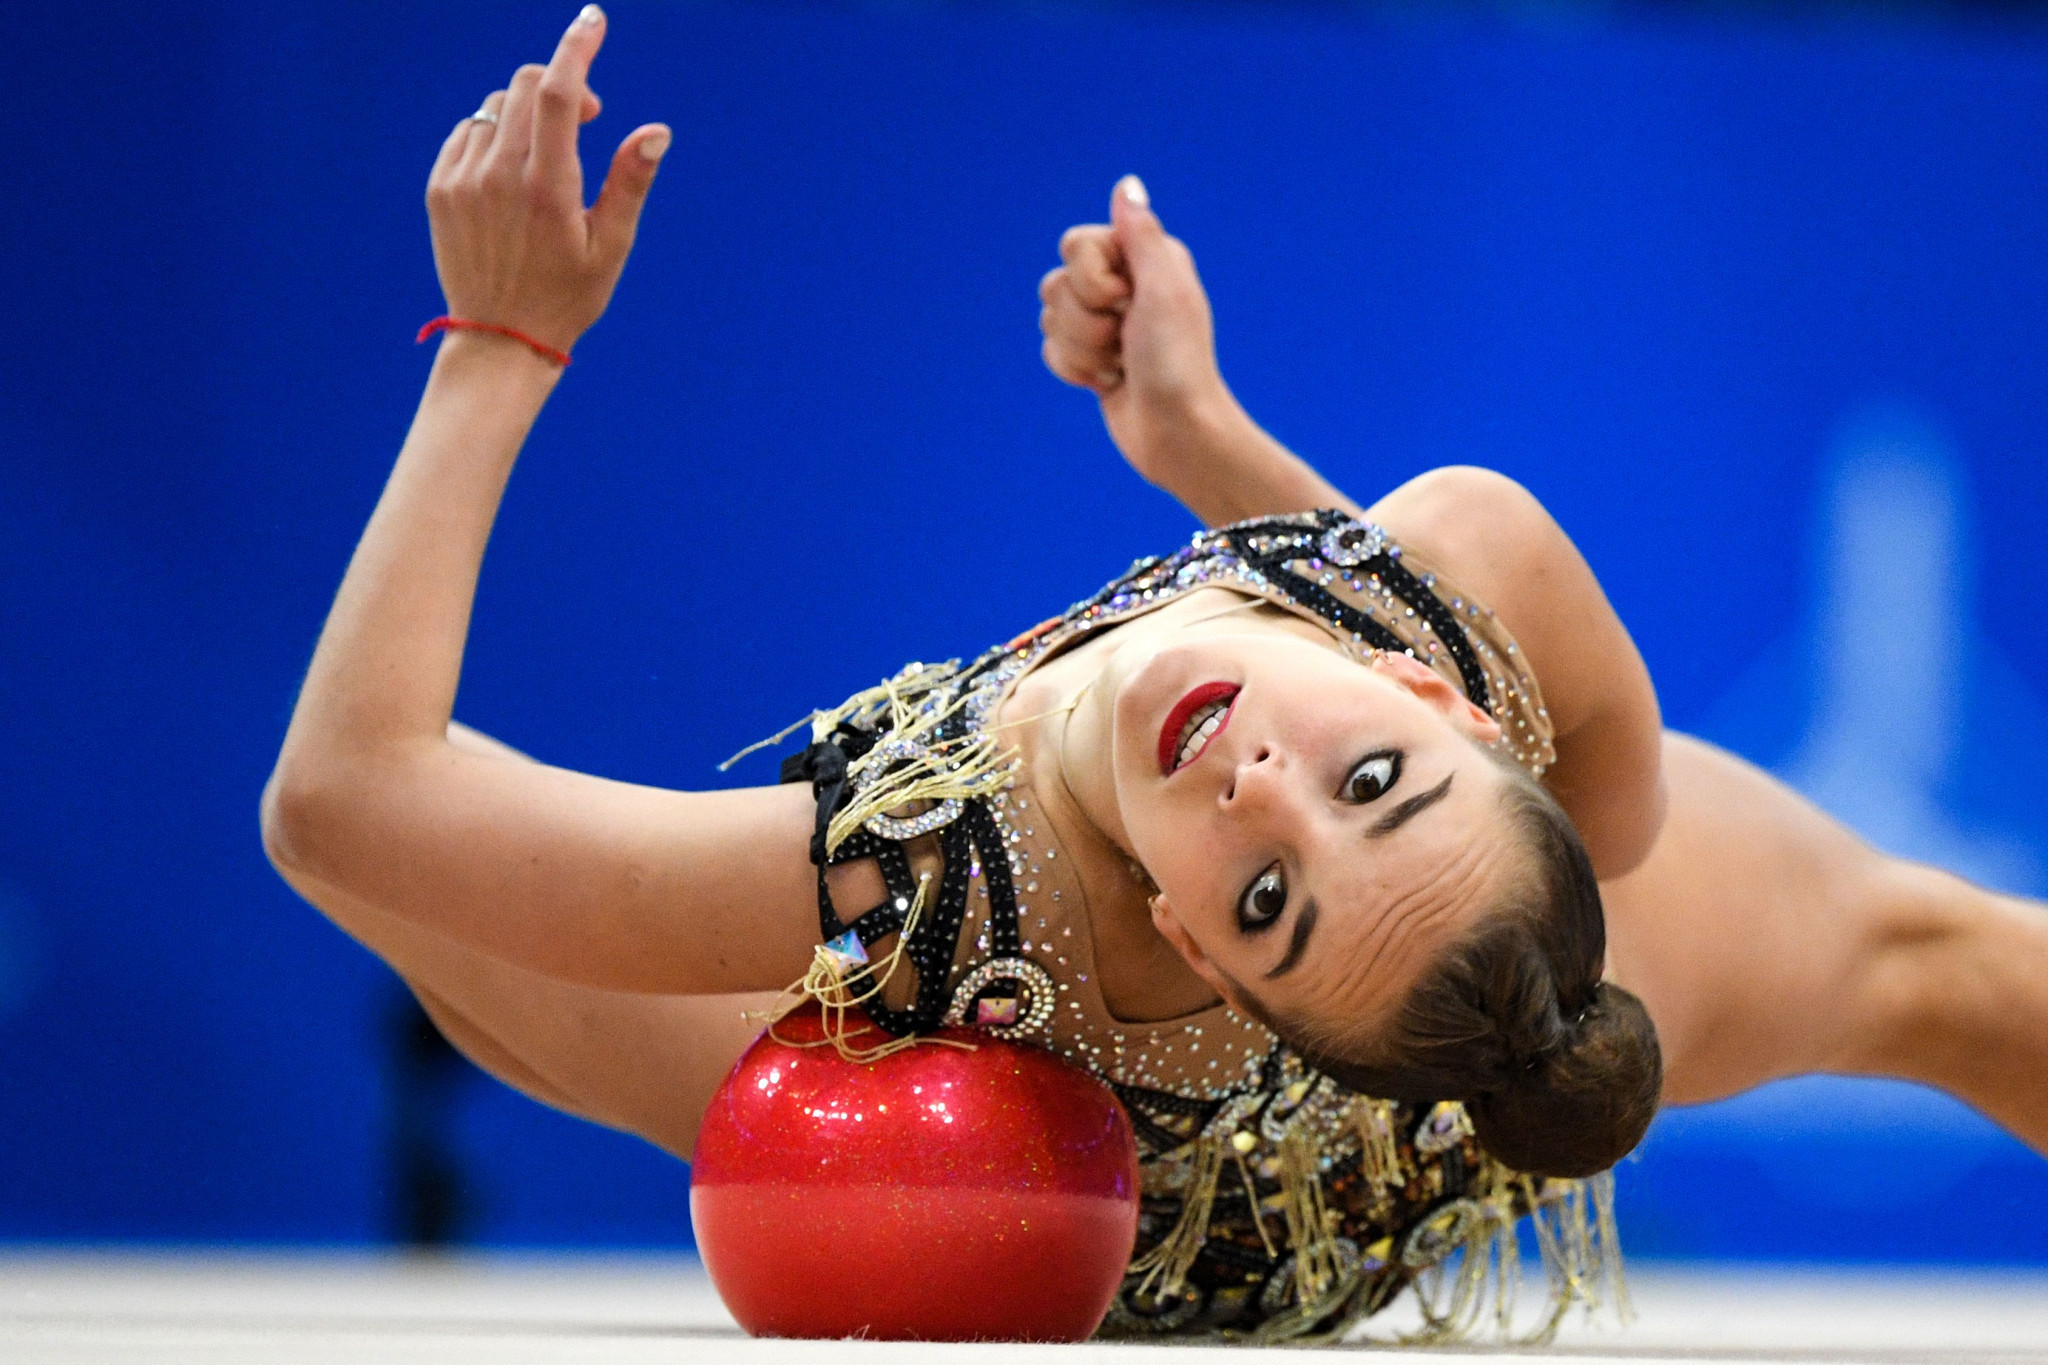 Averina settles for less than perfection with gold and bronze at Rhythmic Gymnastics World Championships